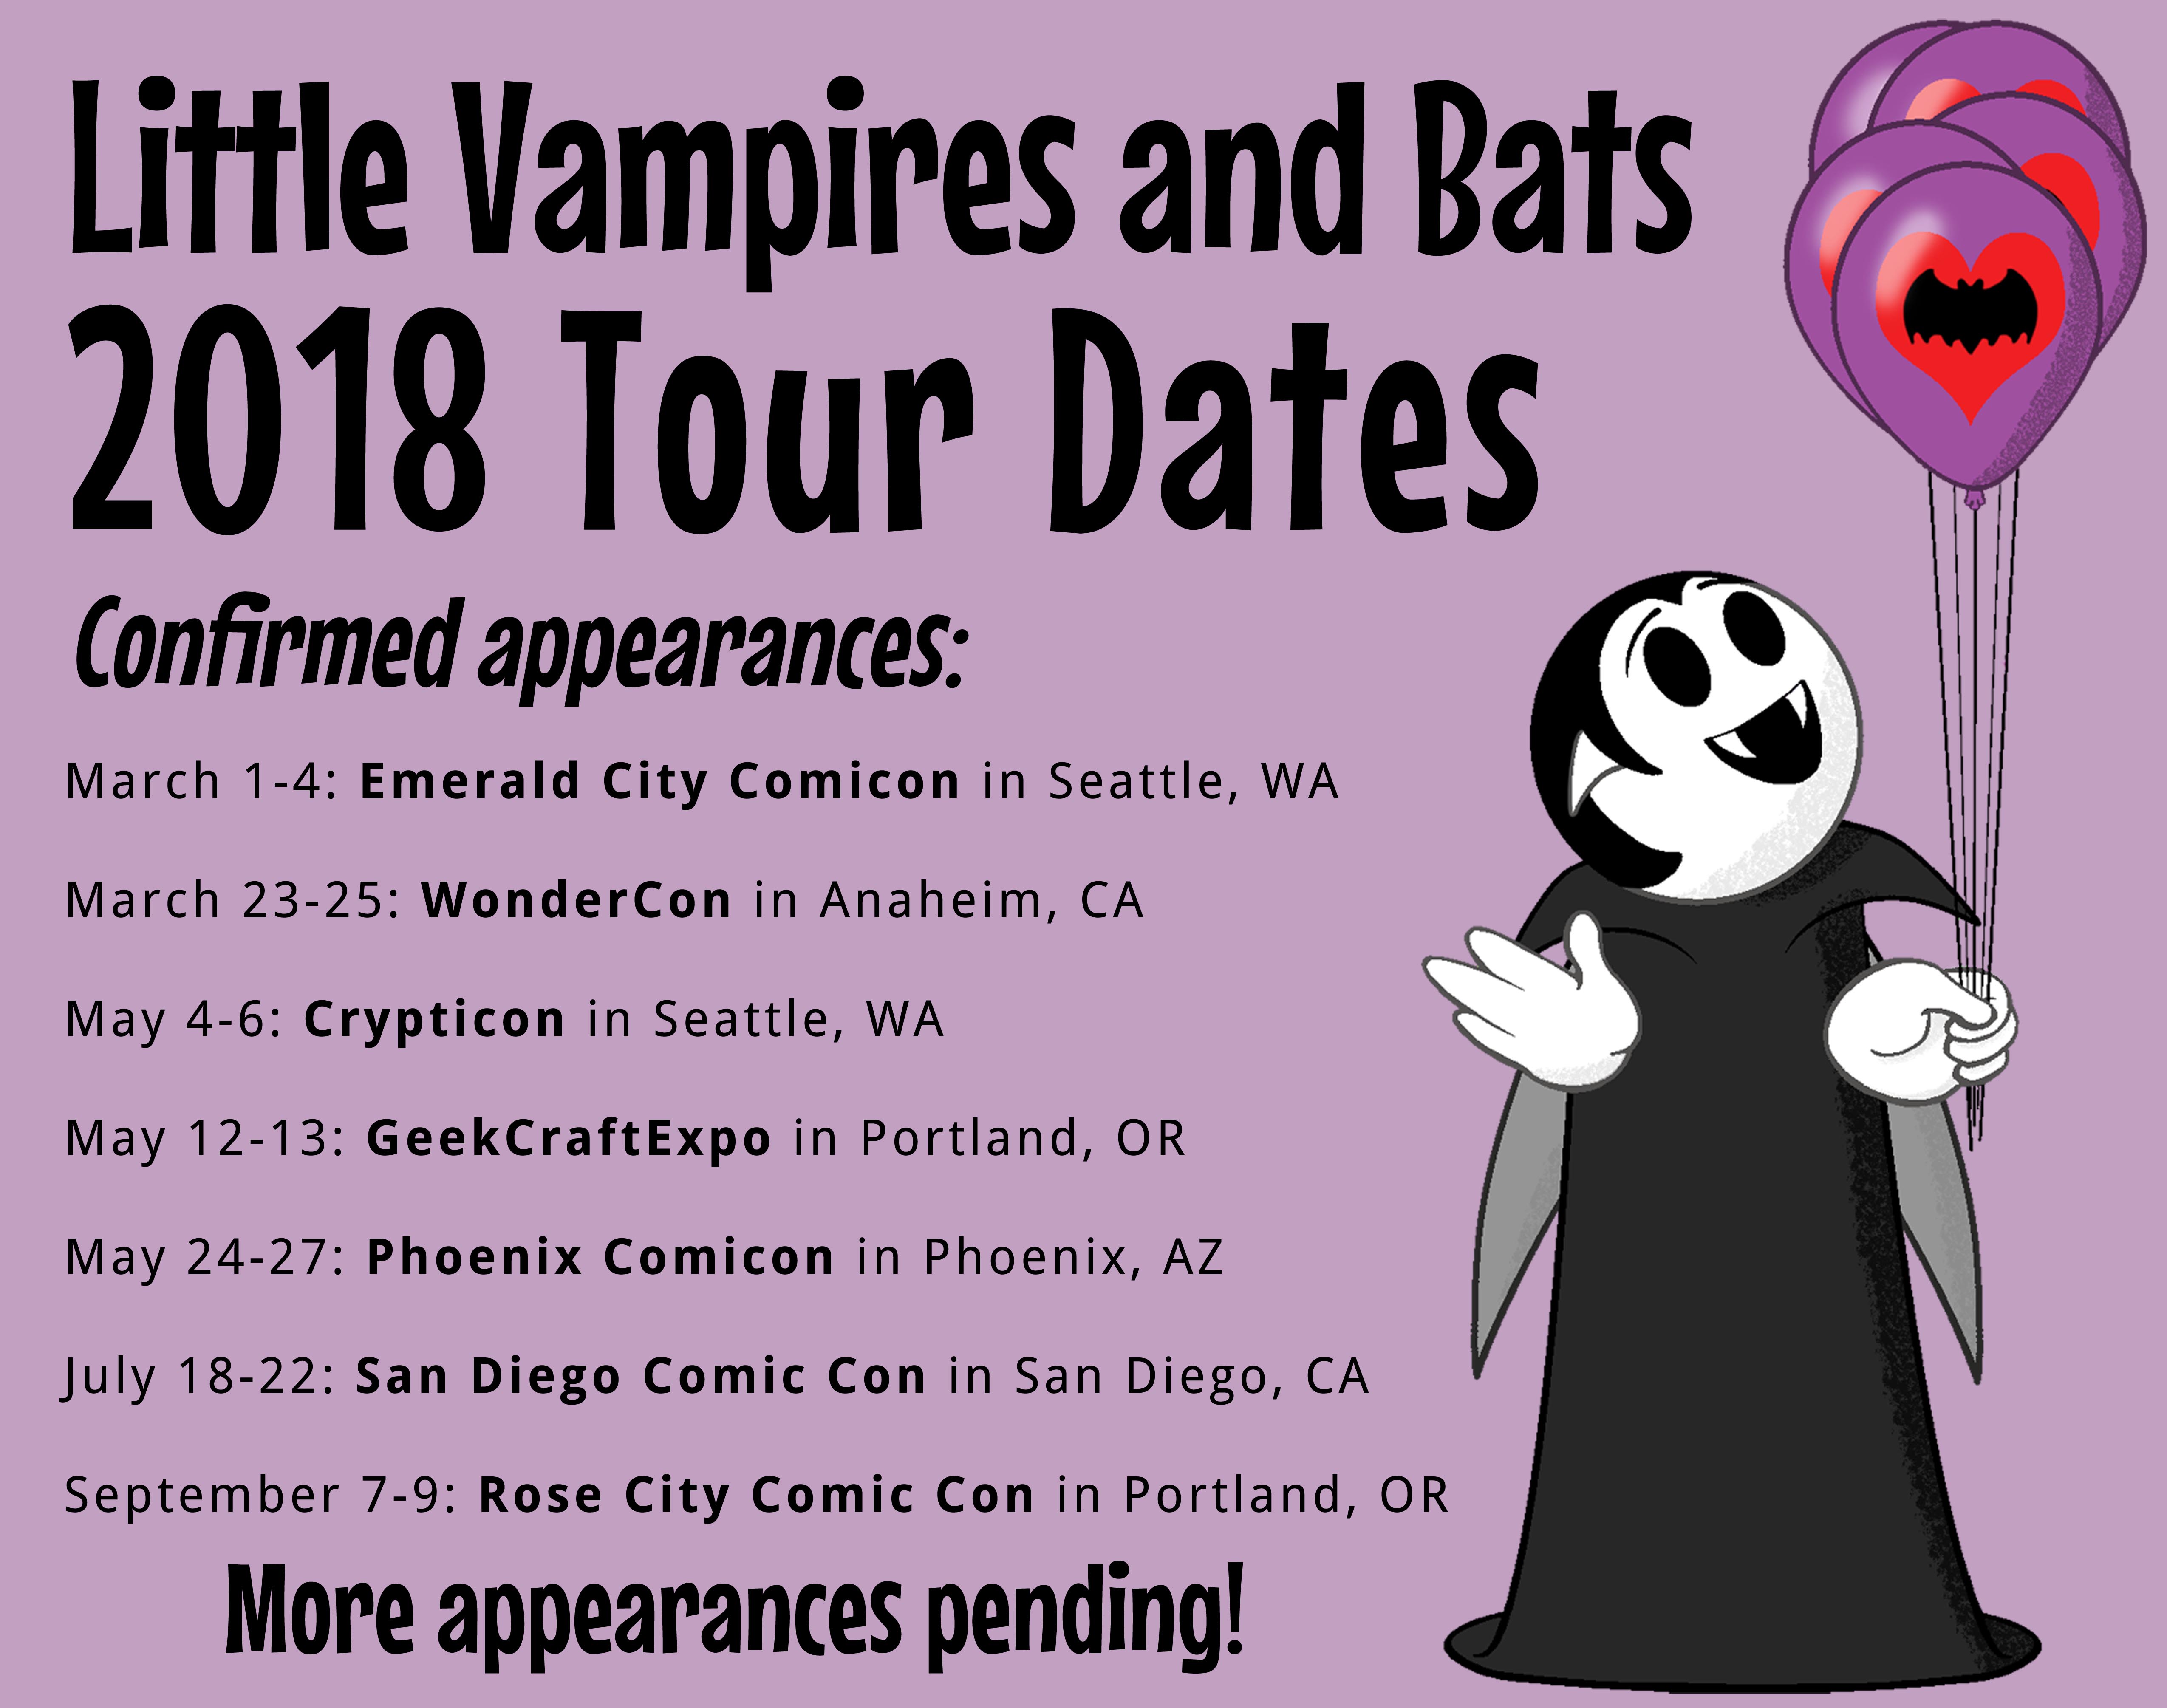 Little Vampires and Bats 2018 Tour Dates graphic